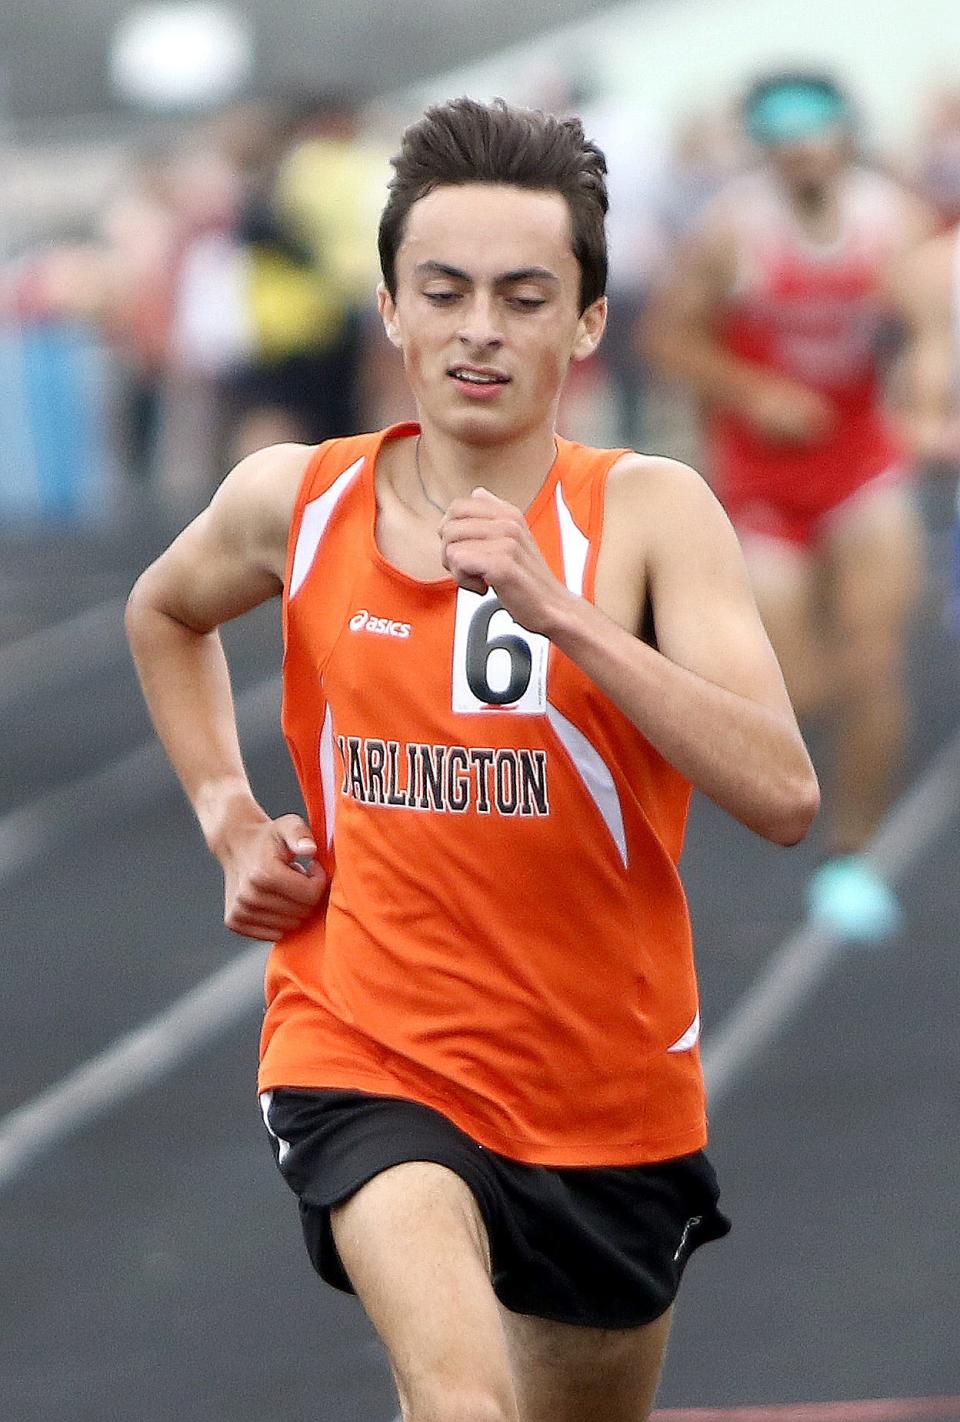 Marlington's Nash Minor qualified for state track after finishing third in the boys 3200 meter final at the Division II track and field regional finals held at Austintown Fitch High School, Saturday, May 28, 2022.